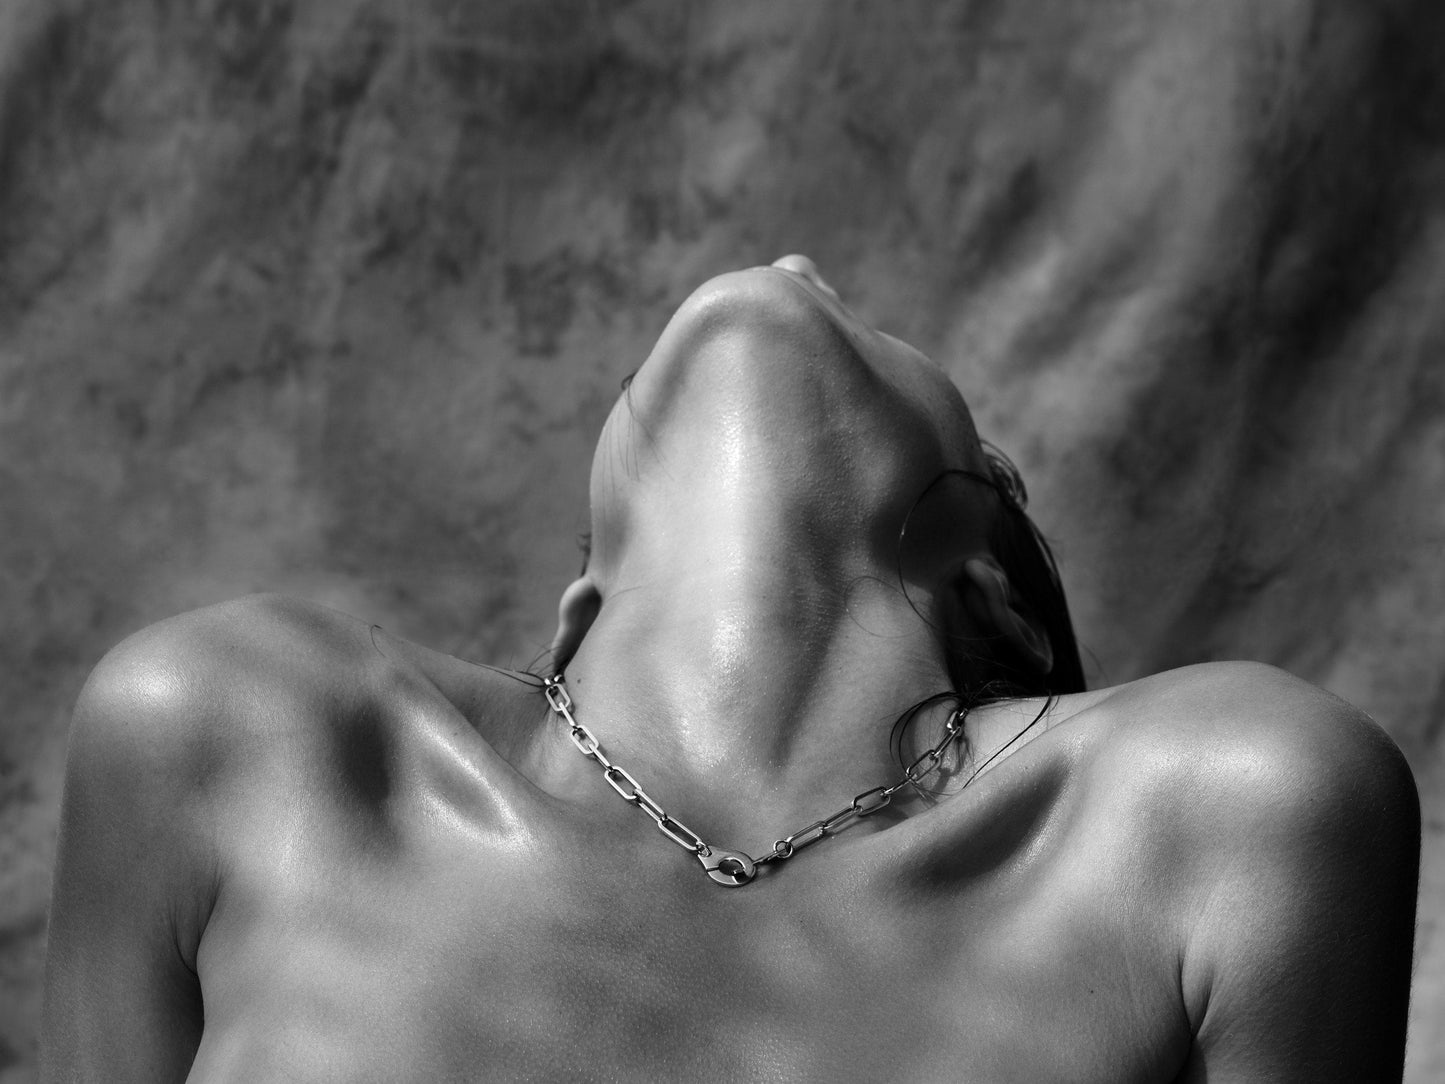 Gianluca Fontana's 'Waves' - Close-up portrait of a woman's upper chest and neck adorned with a delicate necklace, dark grey background, part of the Krops collection, created in Paris, 2018